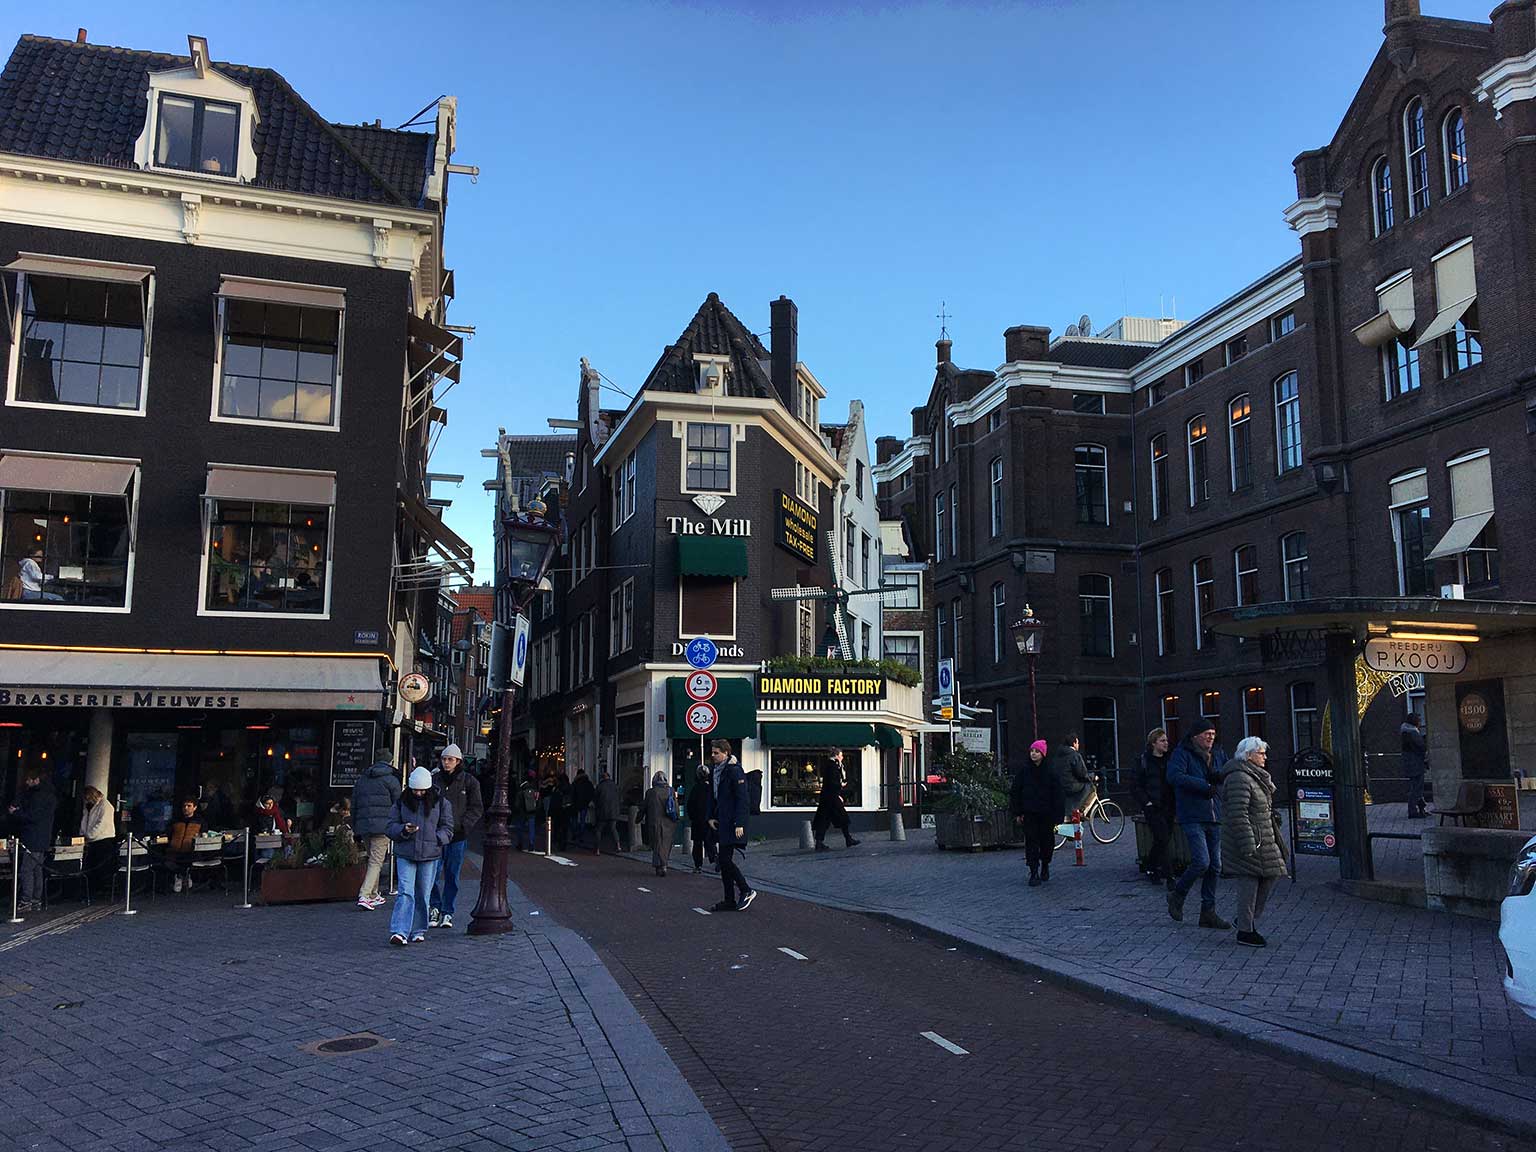 Langebrugsteeg, Amsterdam, with Rokin 123 and Grimburgwal on the right